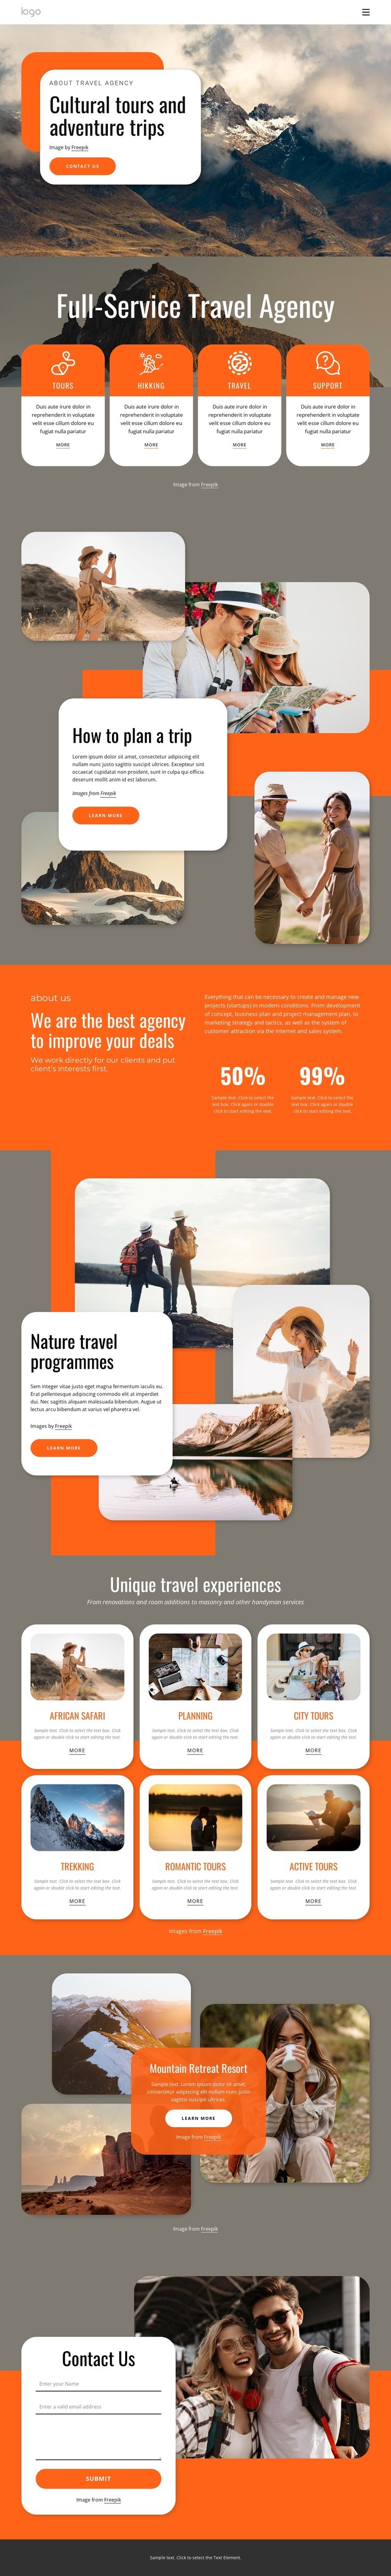 Group travel for all ages Elementor Template Alternative